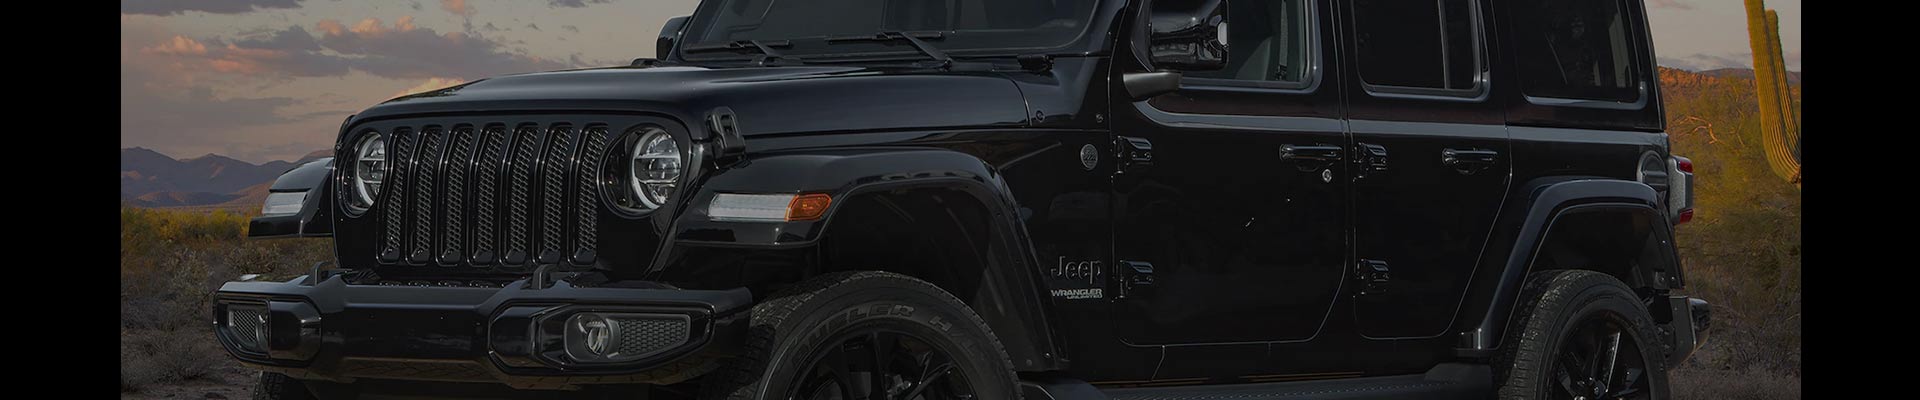 Shop Replacement and OEM 2003 Jeep Wrangler Parts with Discounted Price on the Net